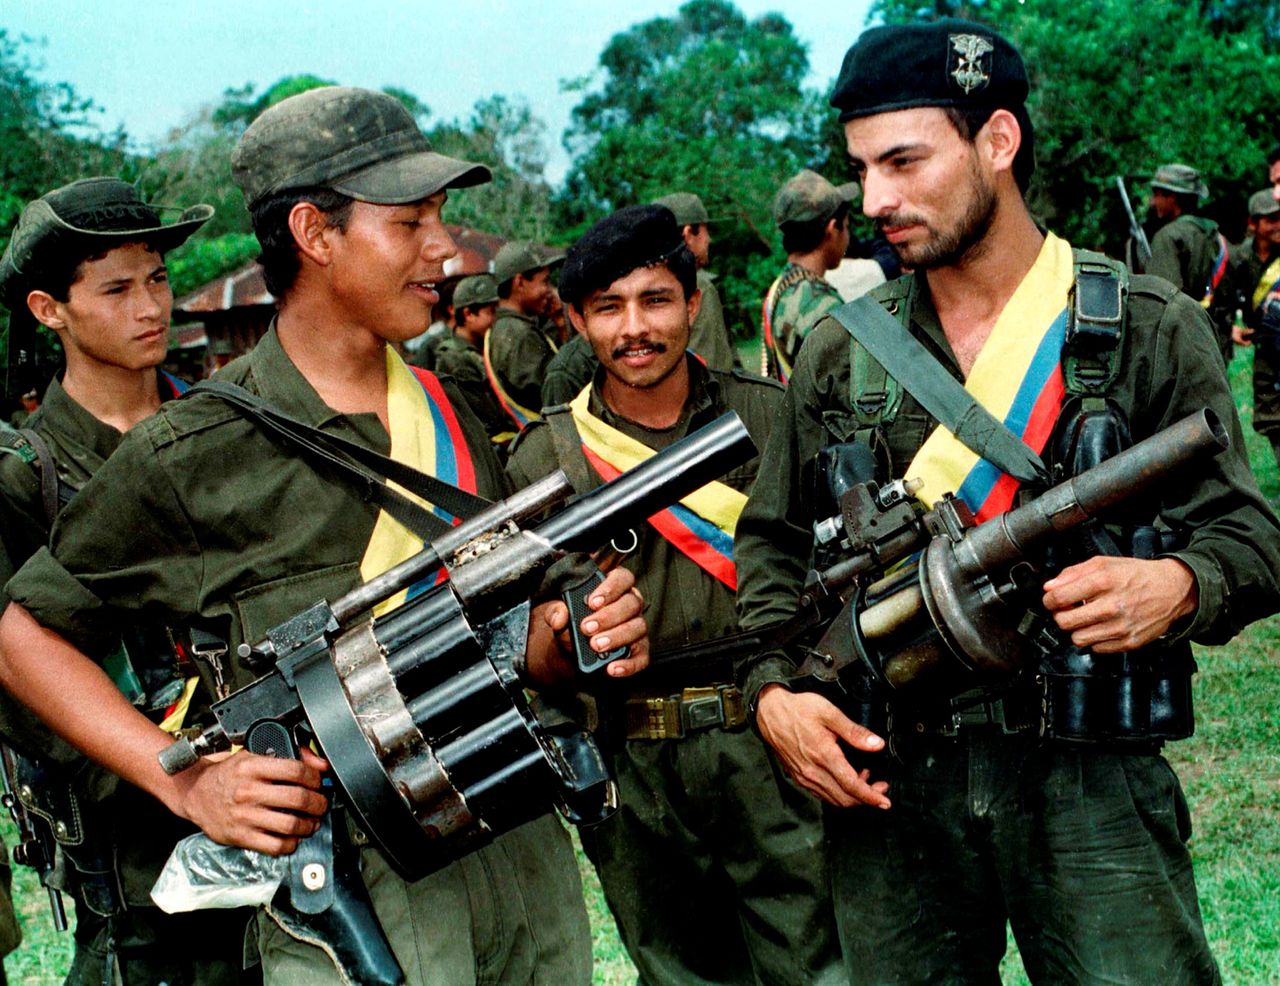 FARC fighters pose with their weapons after a patrol in the jungle near the town of Miraflores. Aug. 7, 1998.